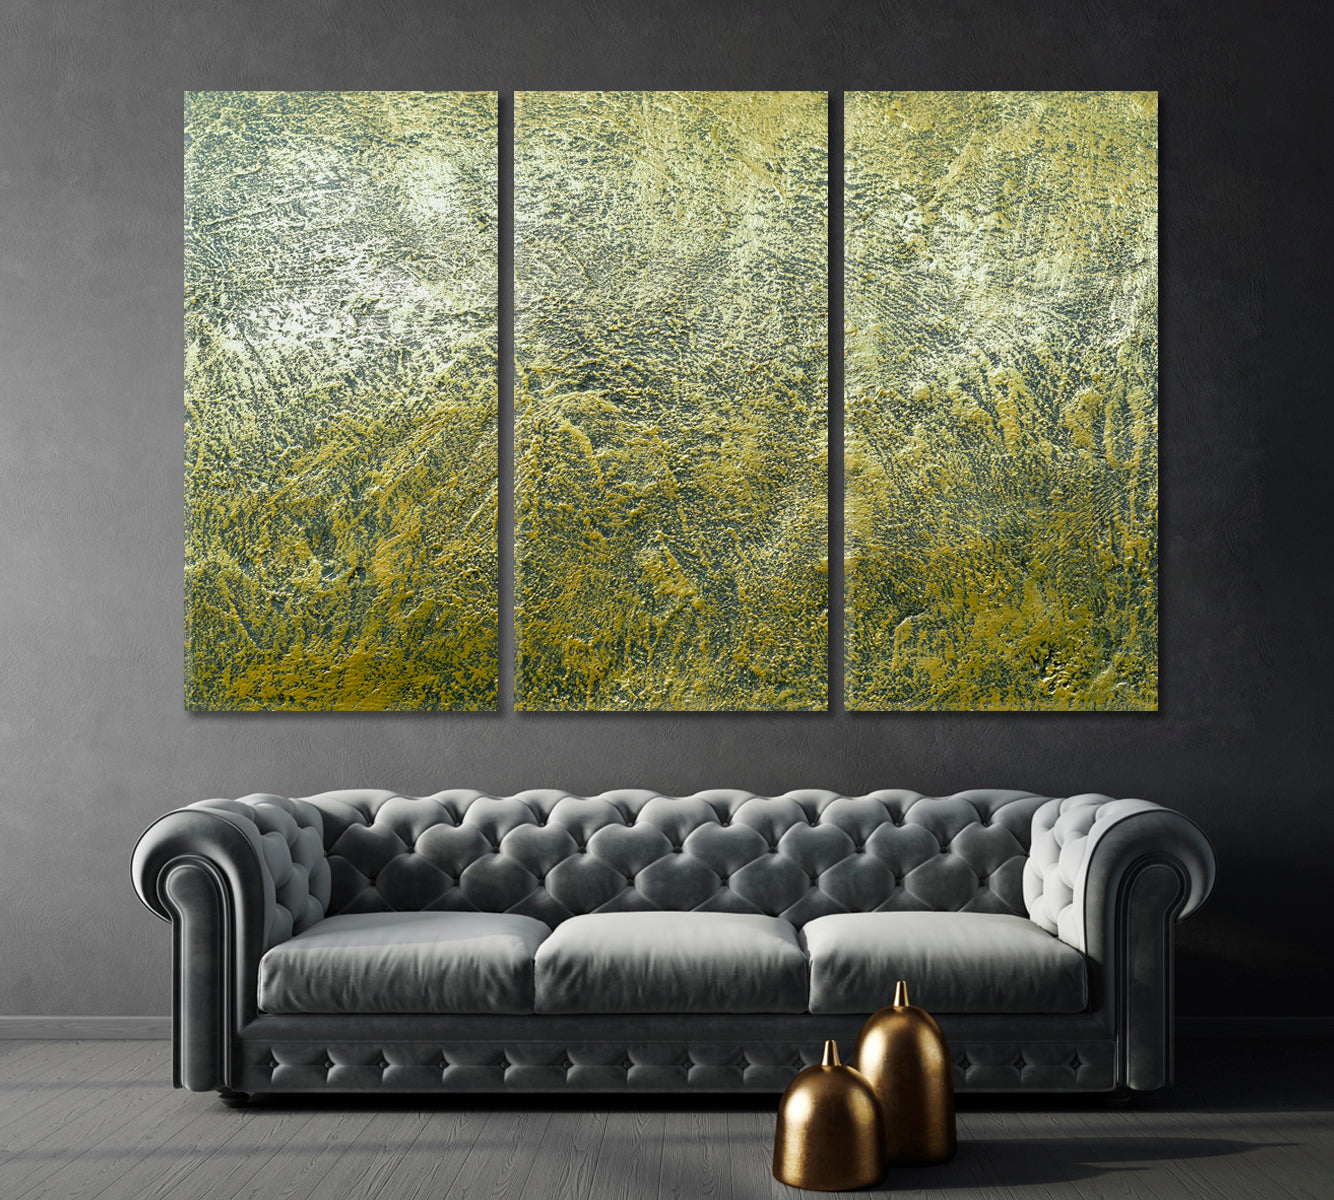 Marble with Bronze Plating Canvas Print-Canvas Print-CetArt-1 Panel-24x16 inches-CetArt